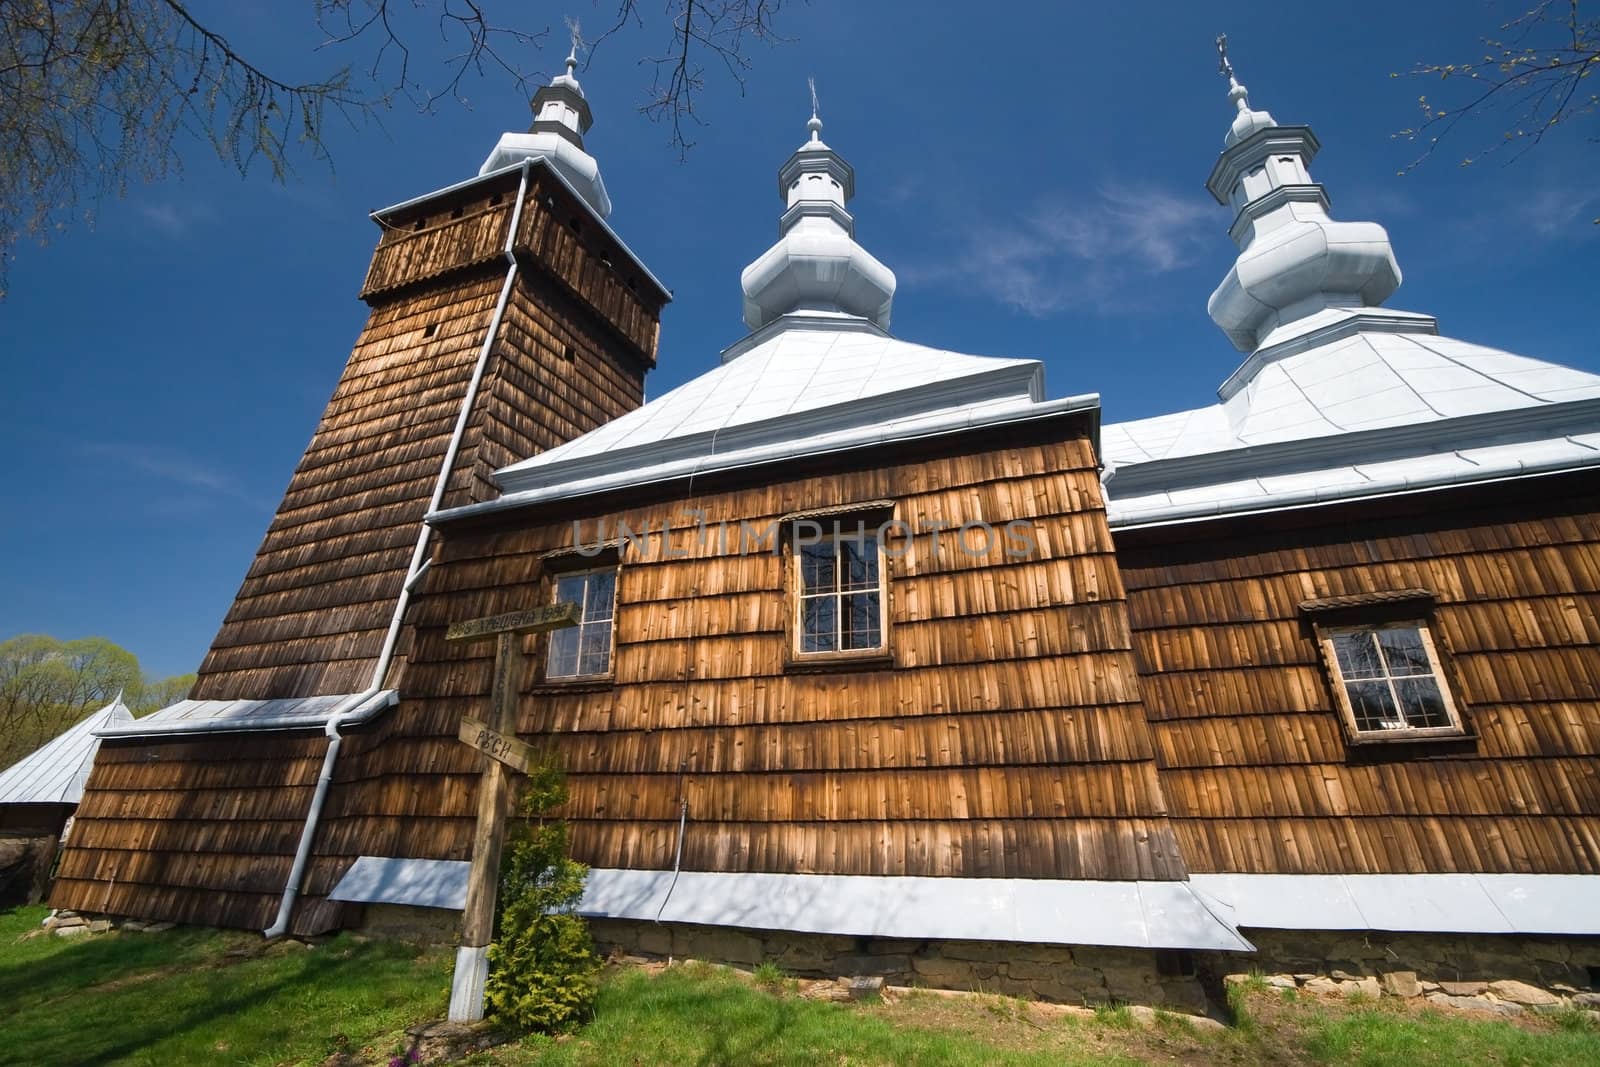 Wide Angle View of Wooden Orthodox Church in Leszczyny builded in XIX century, Poland